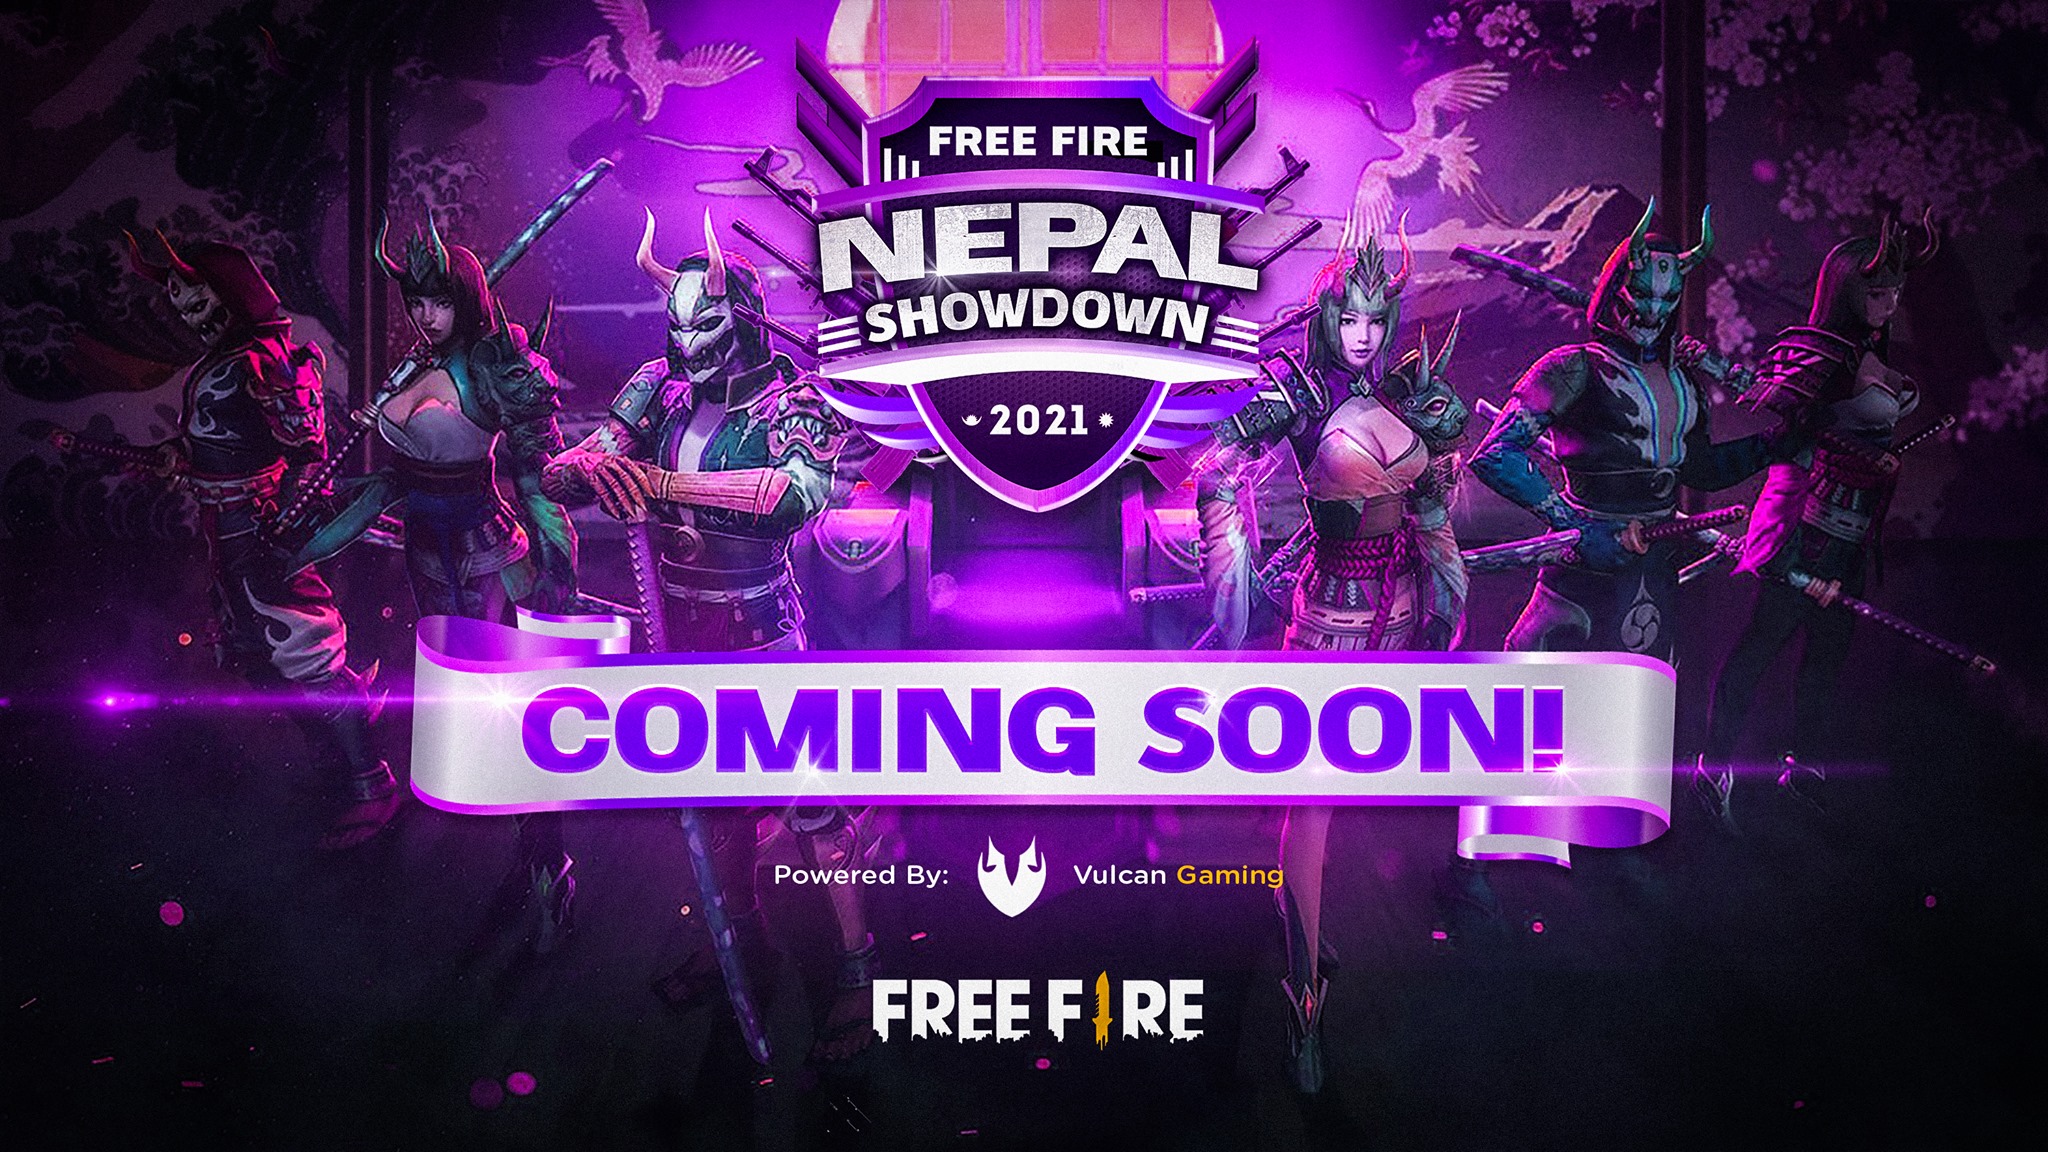 Garena Free Fire Club Of Nepalese